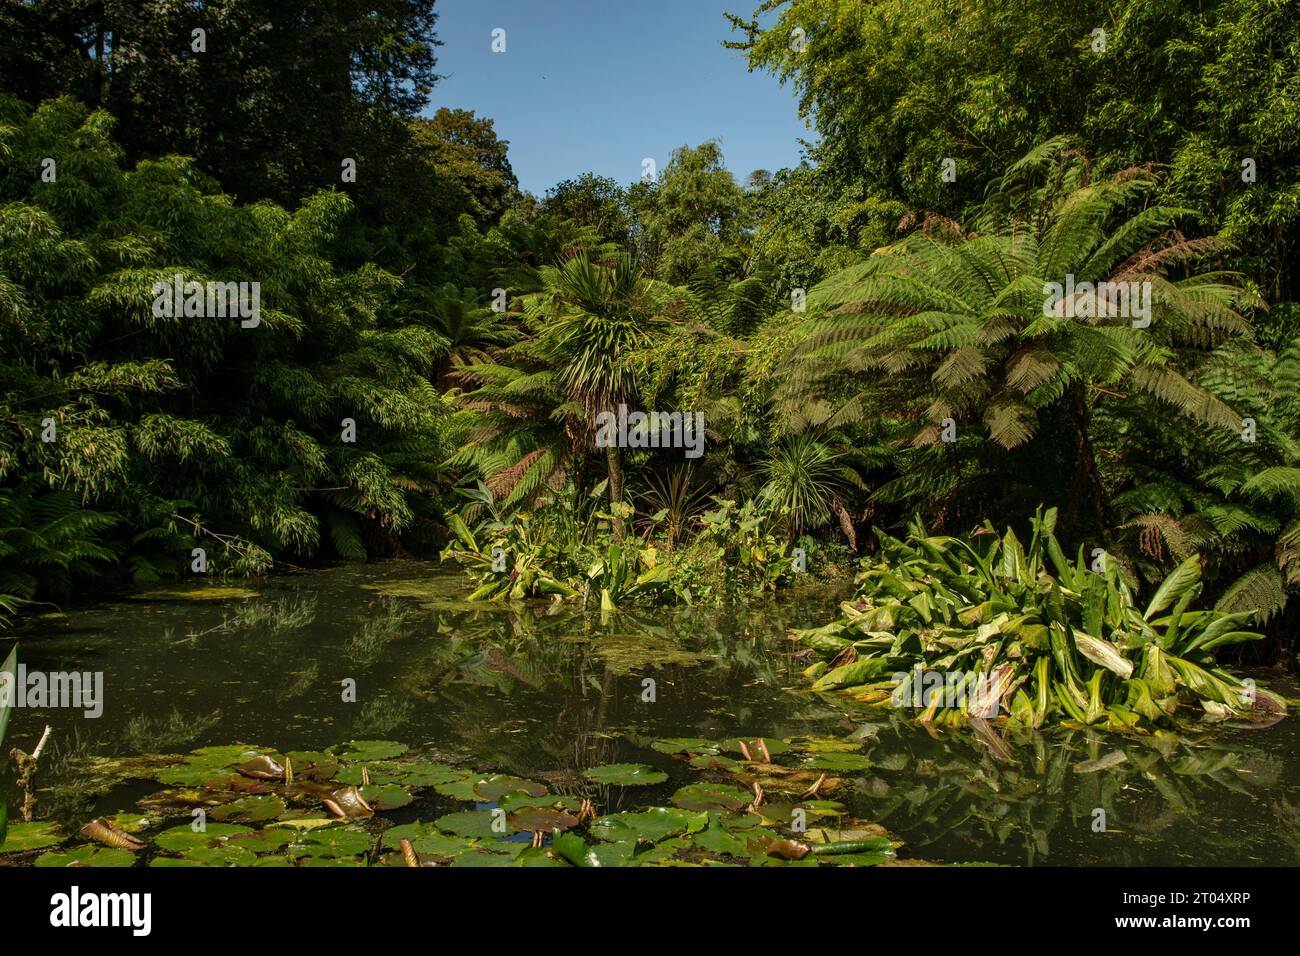 Tree Ferns in Lost Gardens of Heligan, St Austell, Cornwall, England Stock Photo